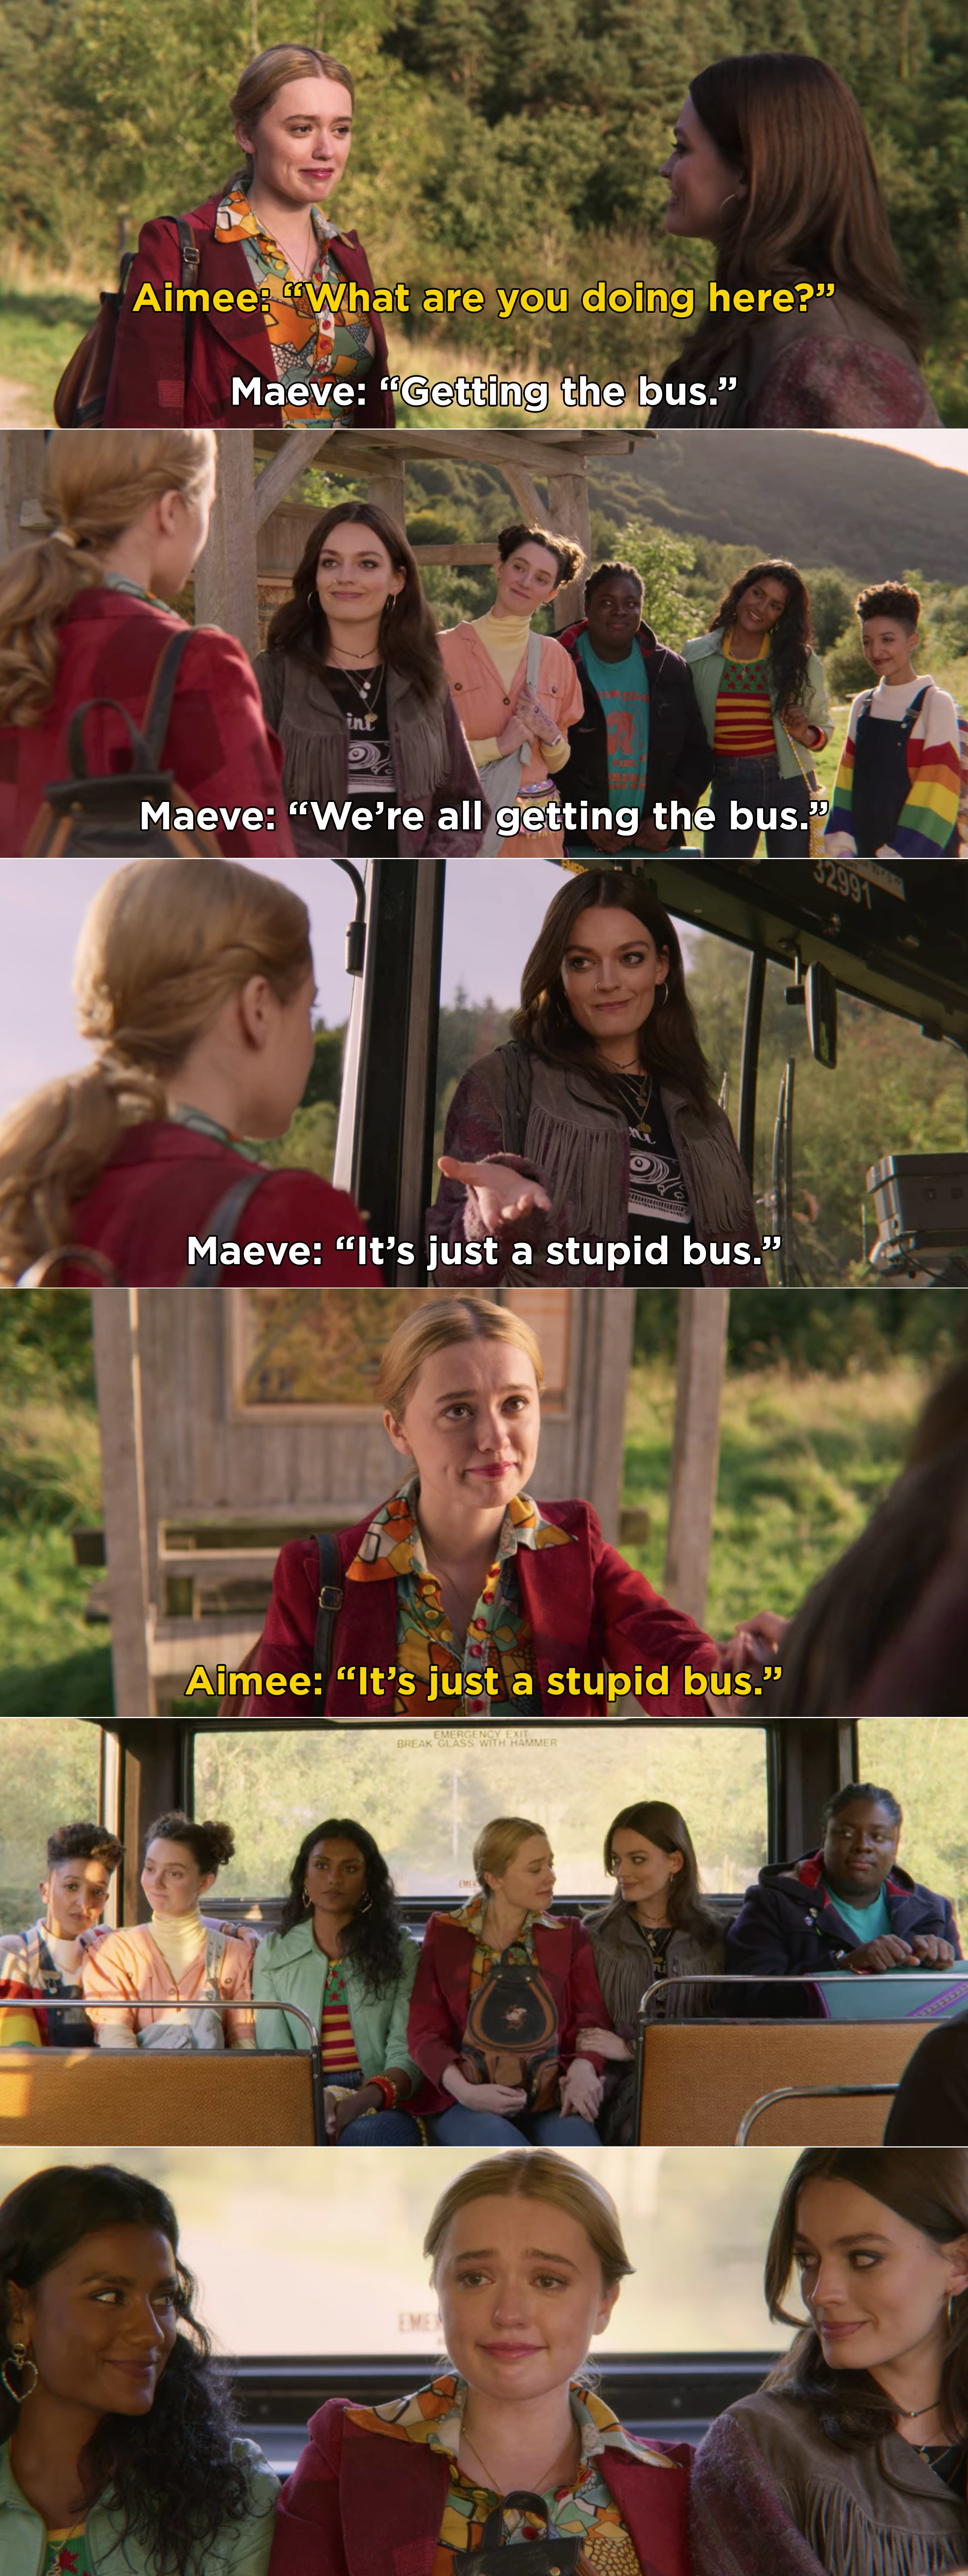 Maeve telling Aimee that they are all getting on the bus